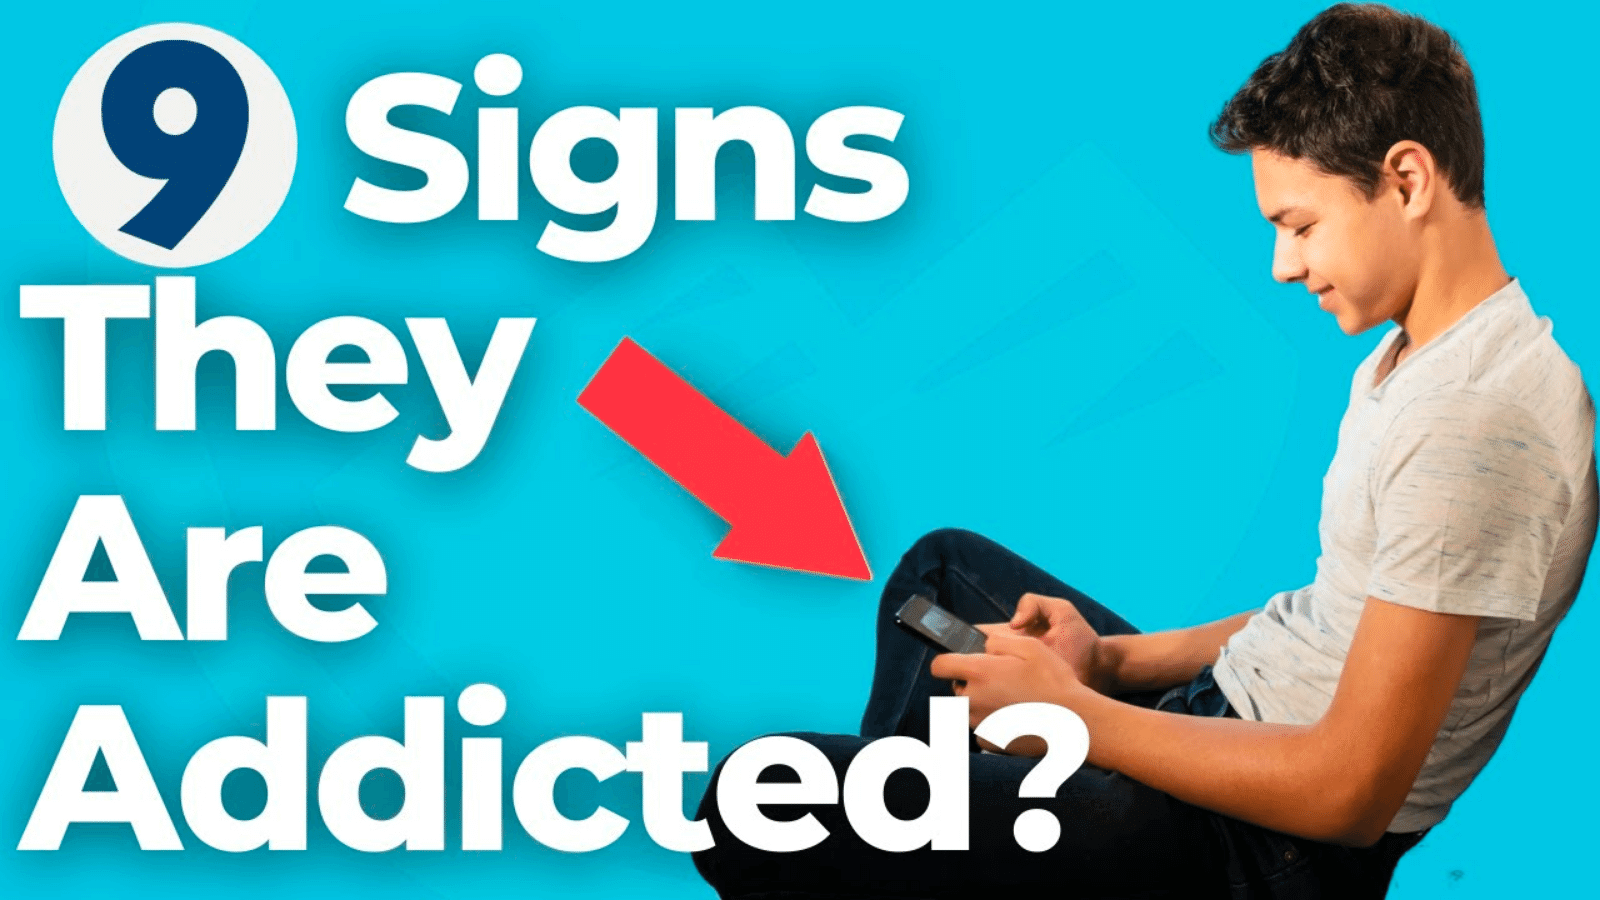 9 signs they are addicted?